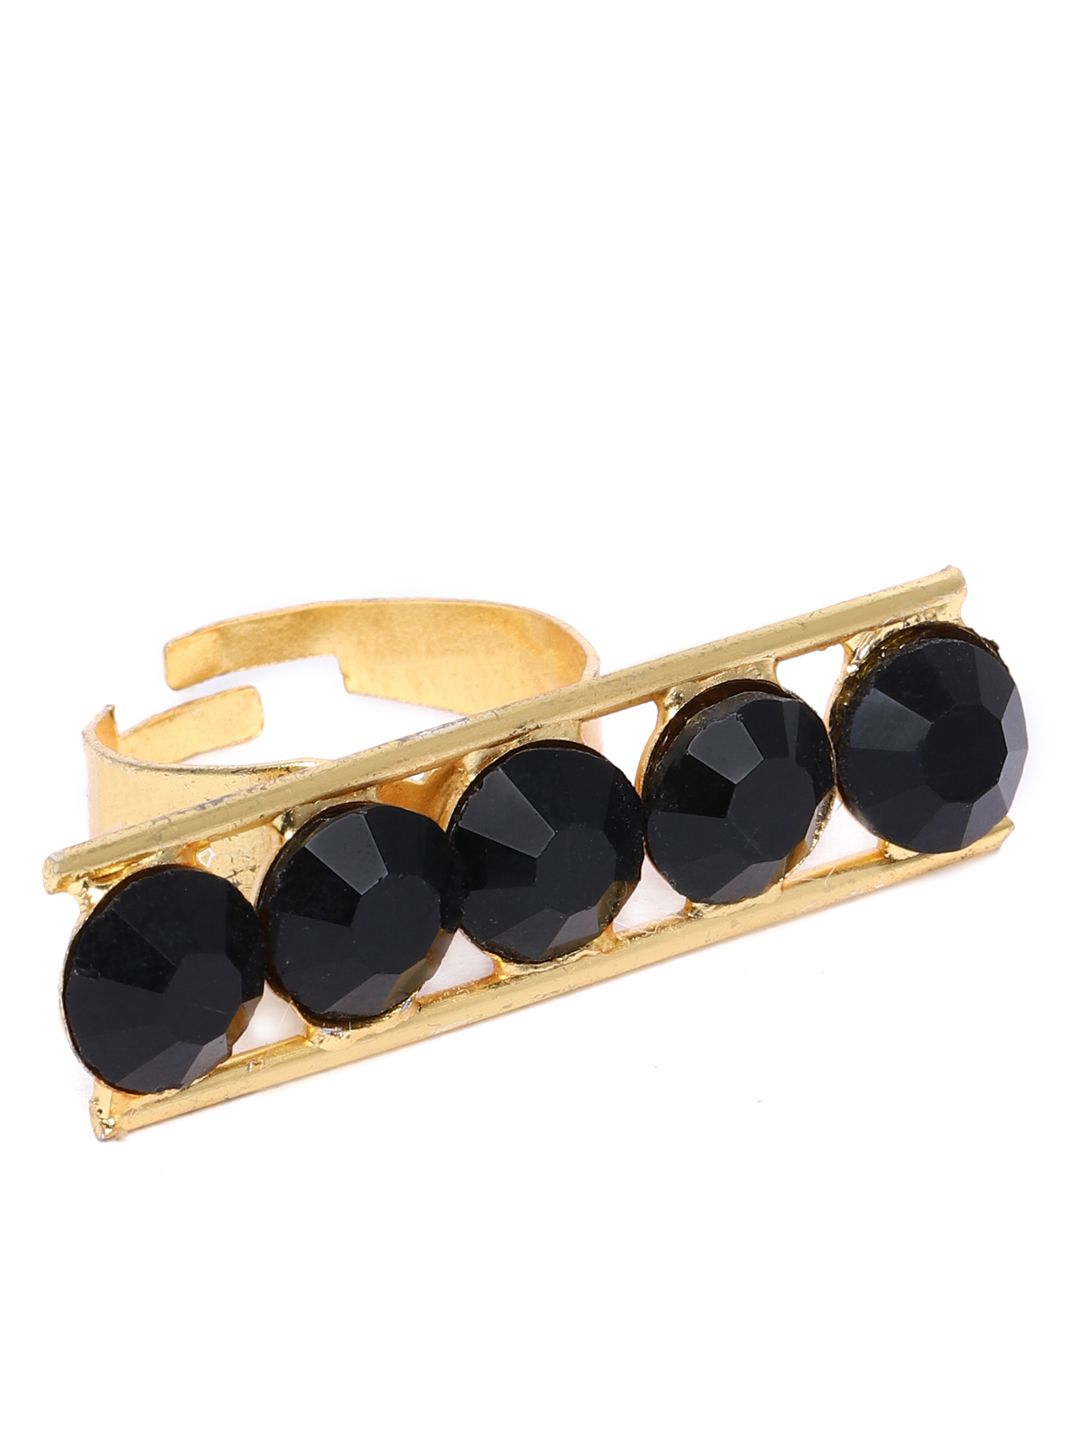 Zaveri Pearls Black Gold-Plated Studded Adjustable Finger Ring Price in India